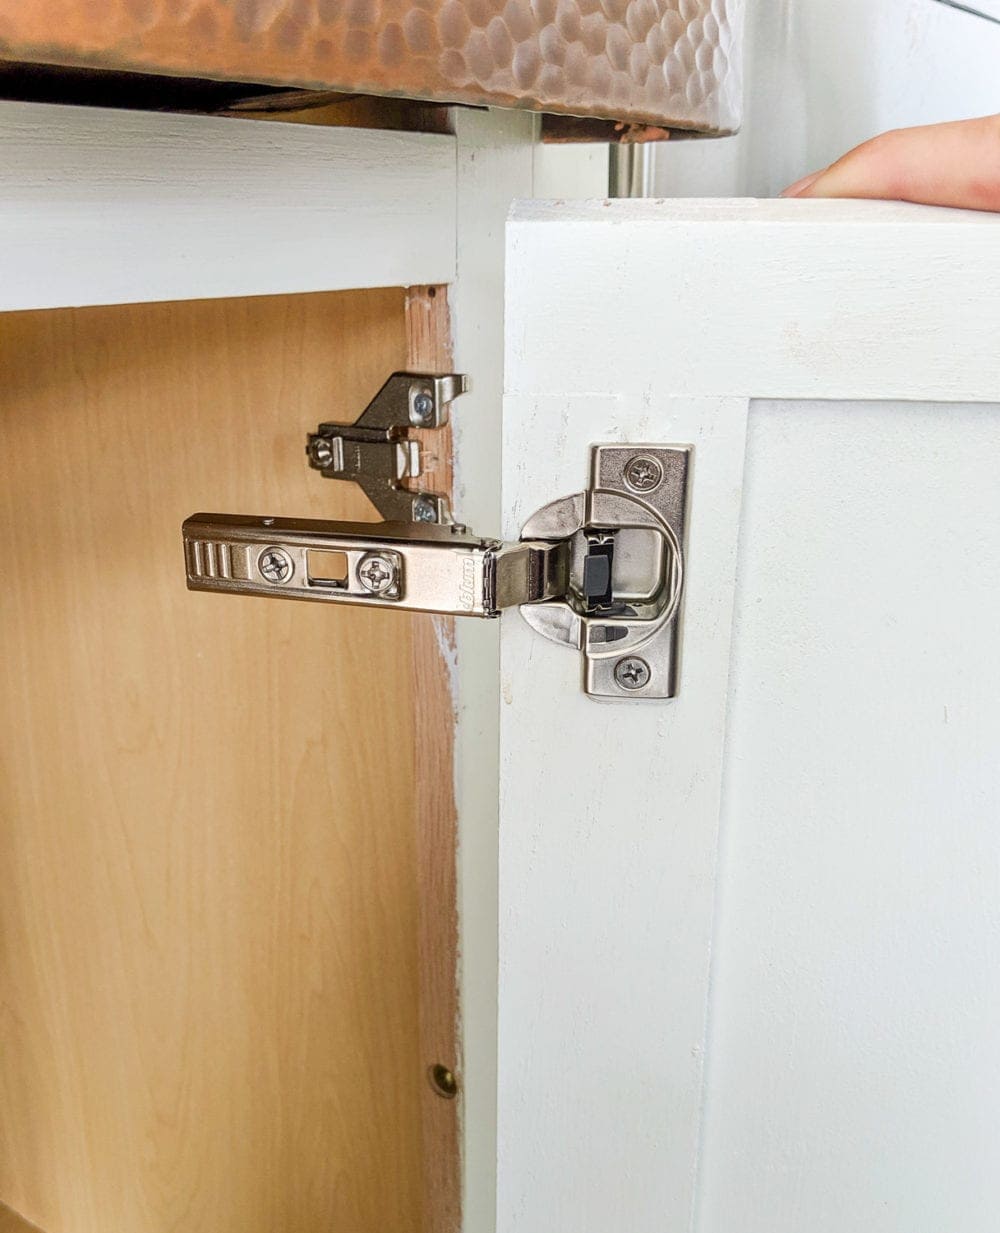 How To Install Soft Close Hinges On Any, How To Put New Hinges On Old Cabinets